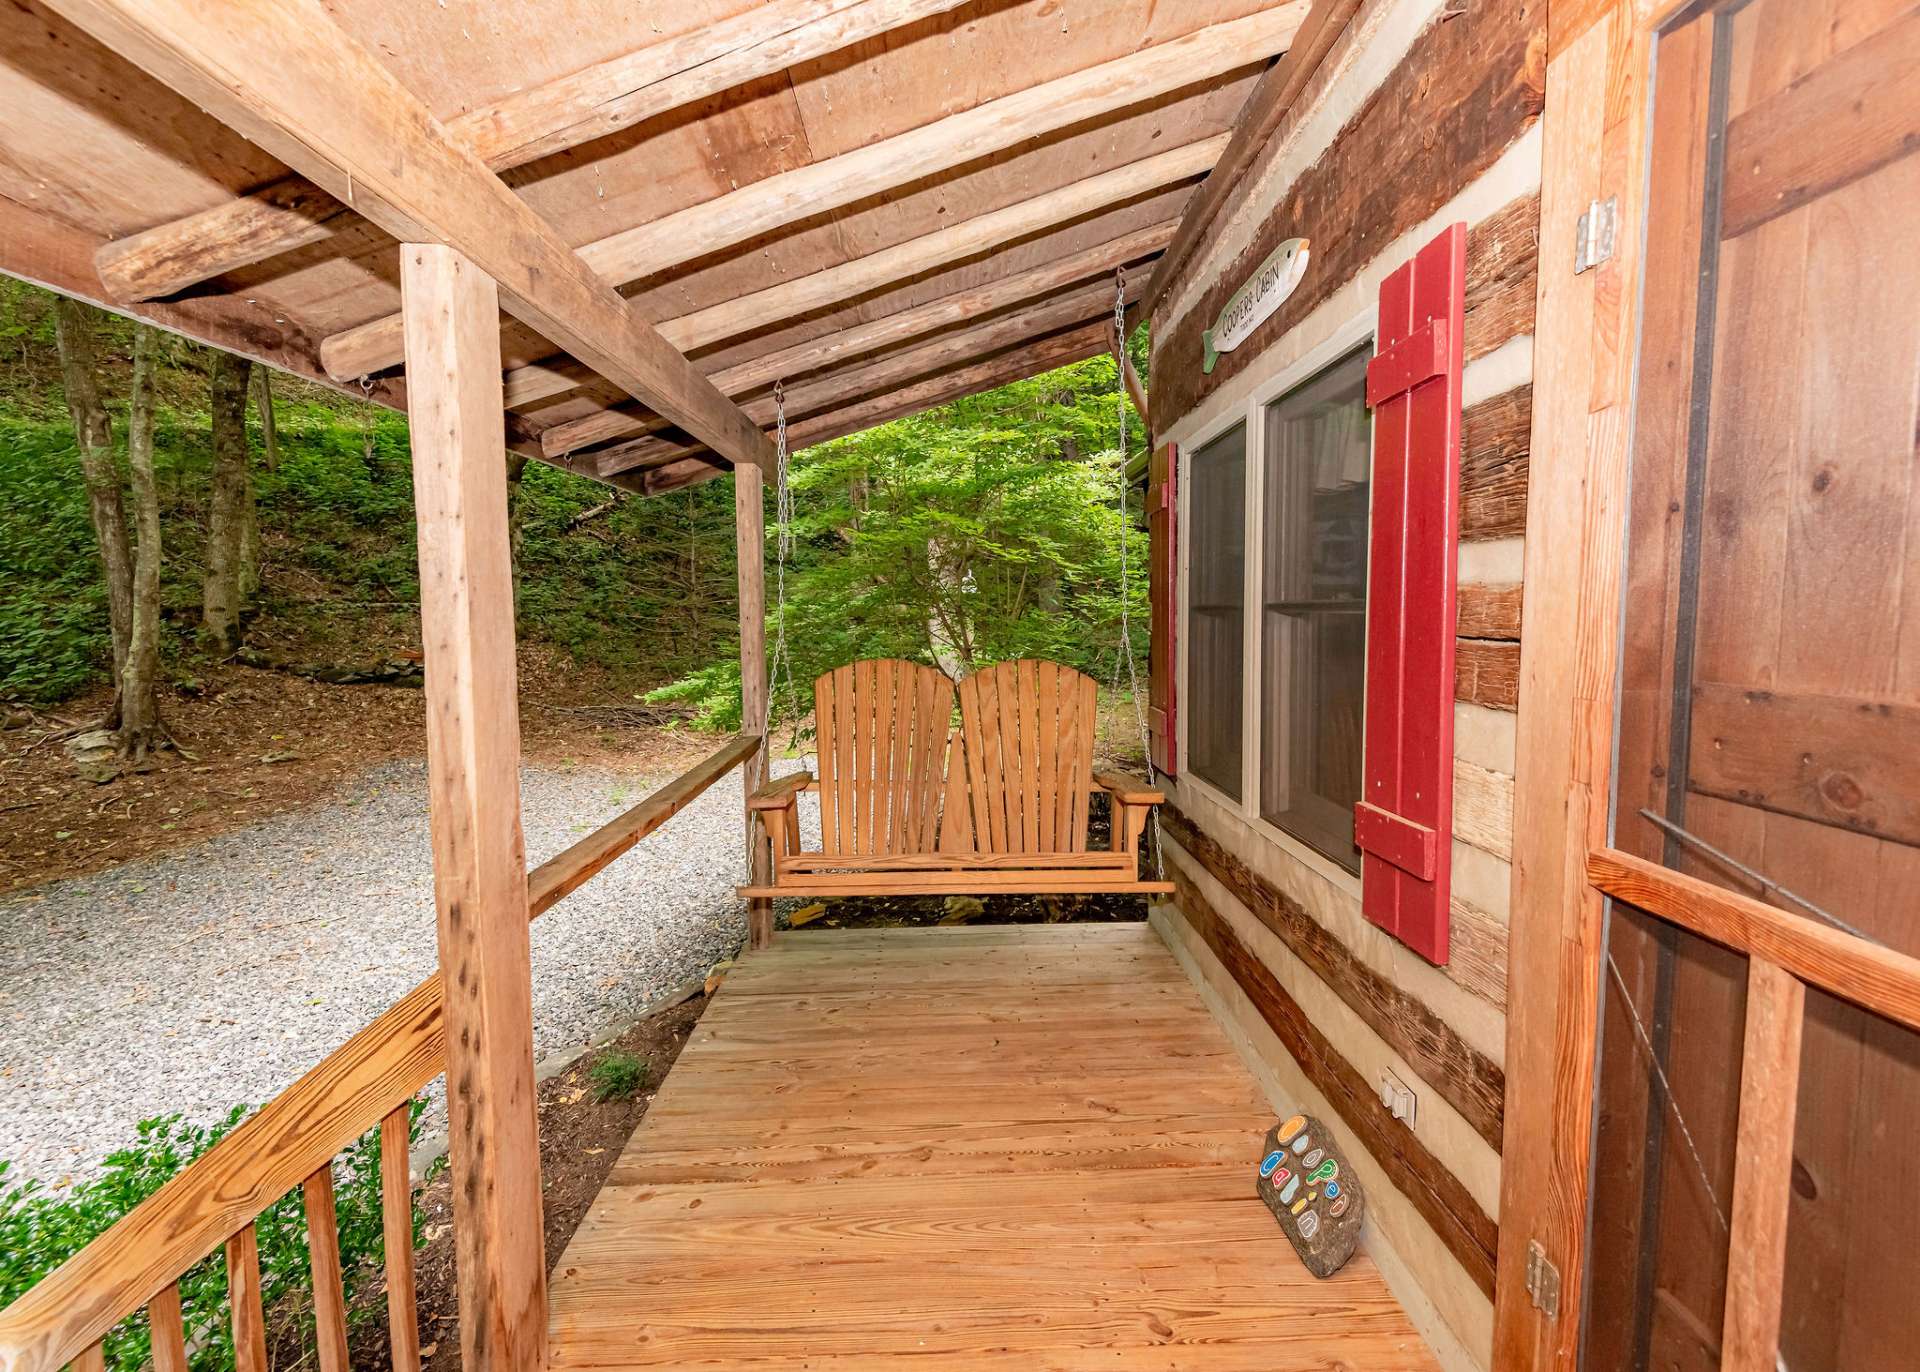 A covered front porch welcomes you and guests to relax and enjoy Nature and mountain living.